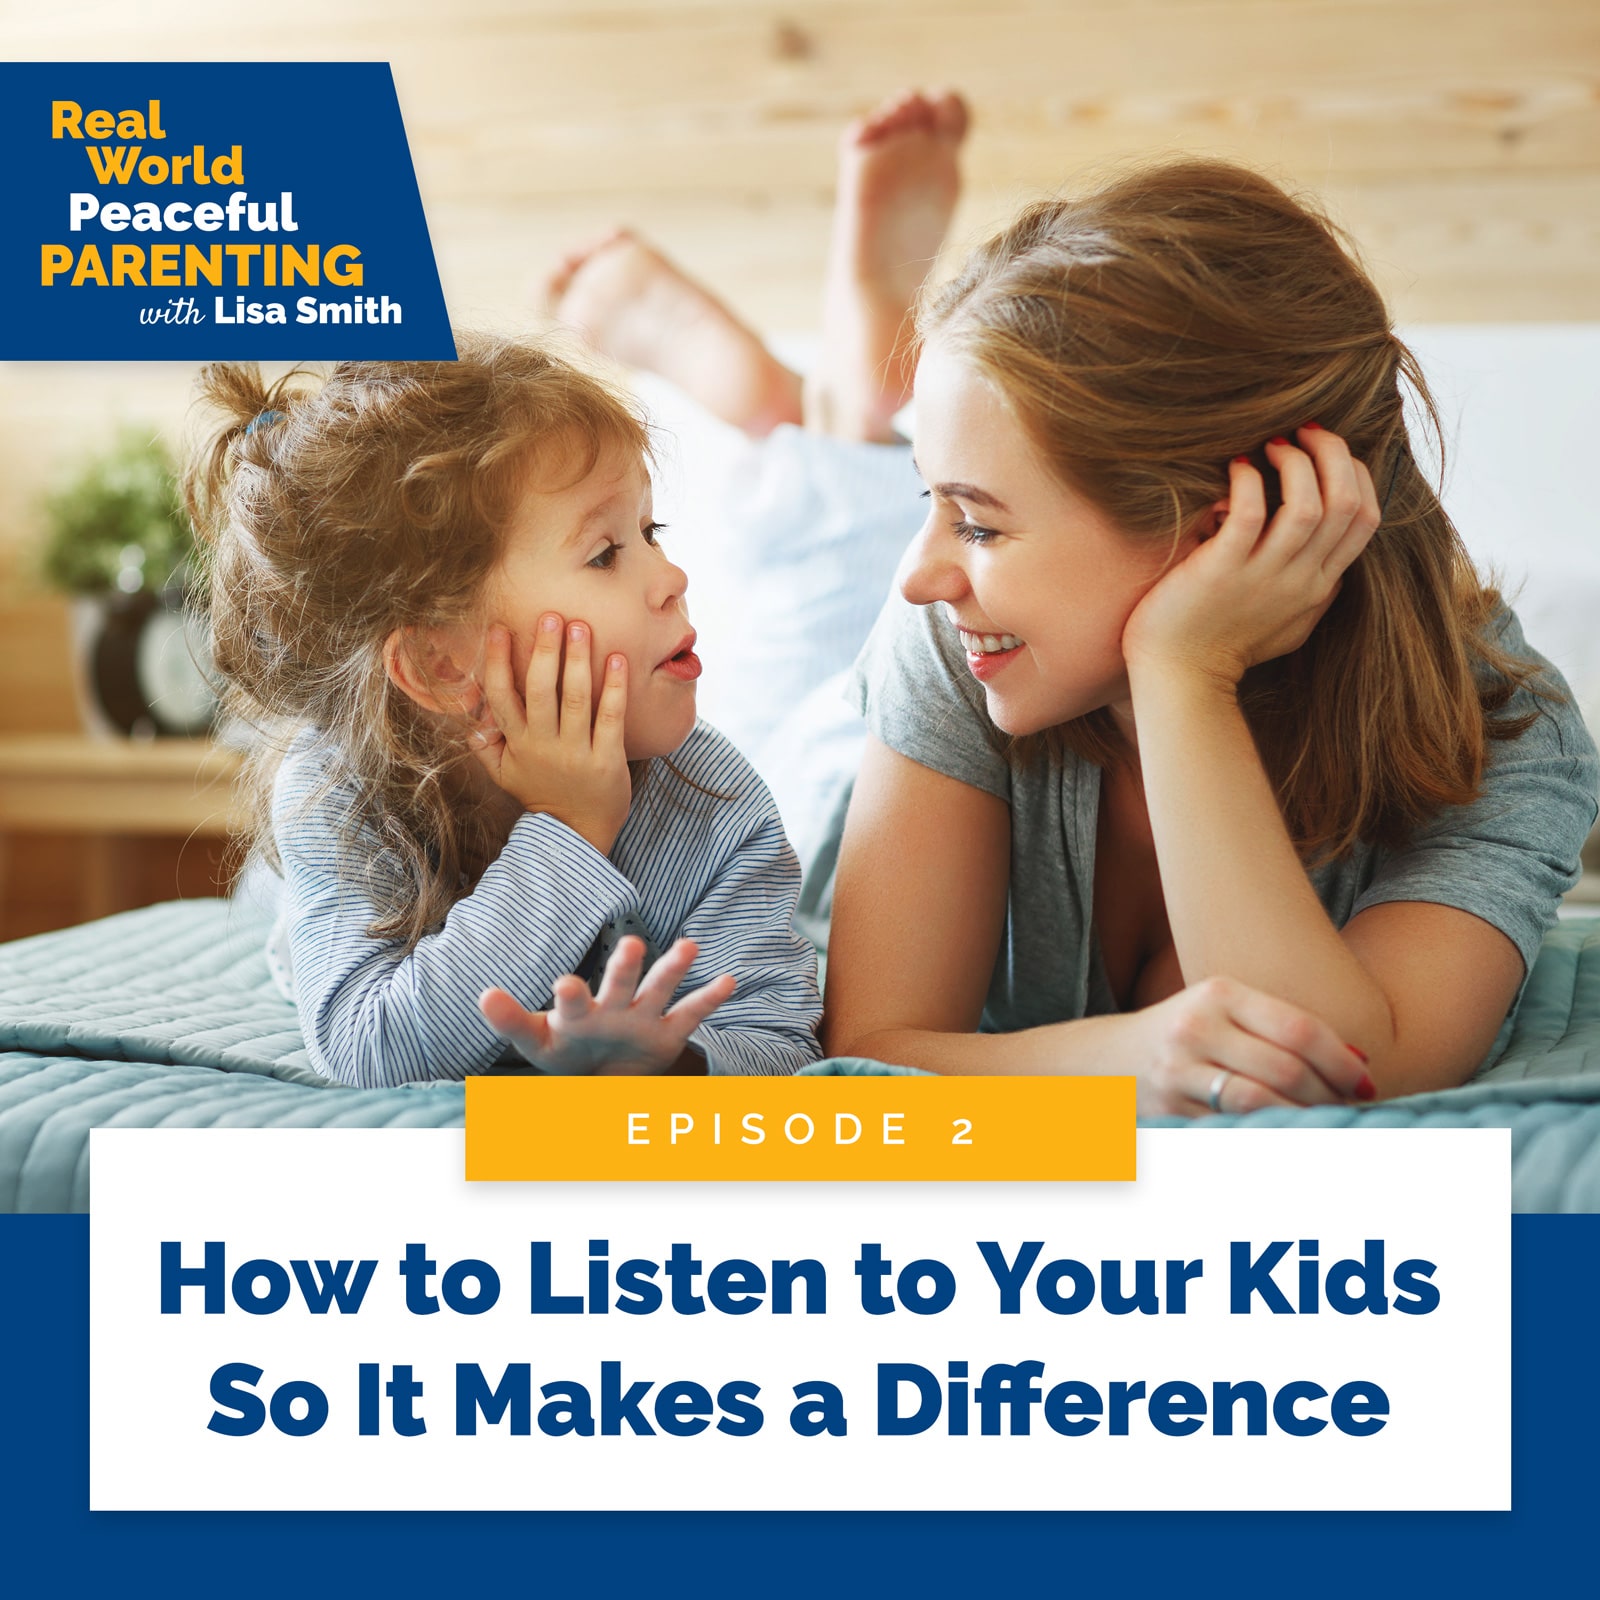 How to Listen to Your Kids So It Makes a Difference